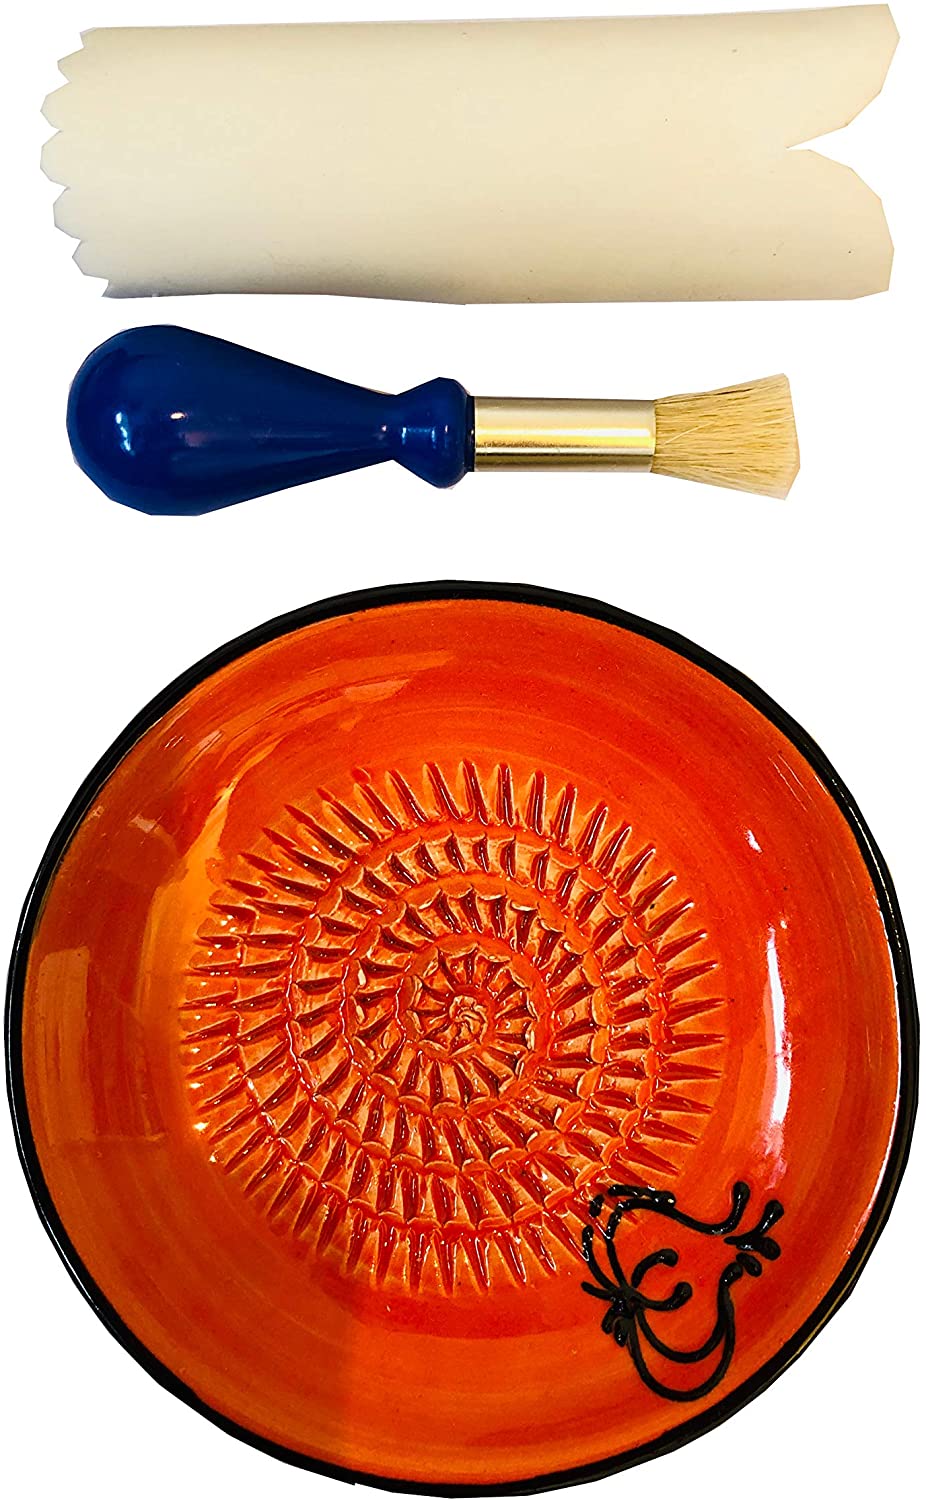 Black Orange Garlic Design (5) Garlic and Ginger Grater Set with Brush and Peeler. A Must for Every Foodie who Loves to Cook.